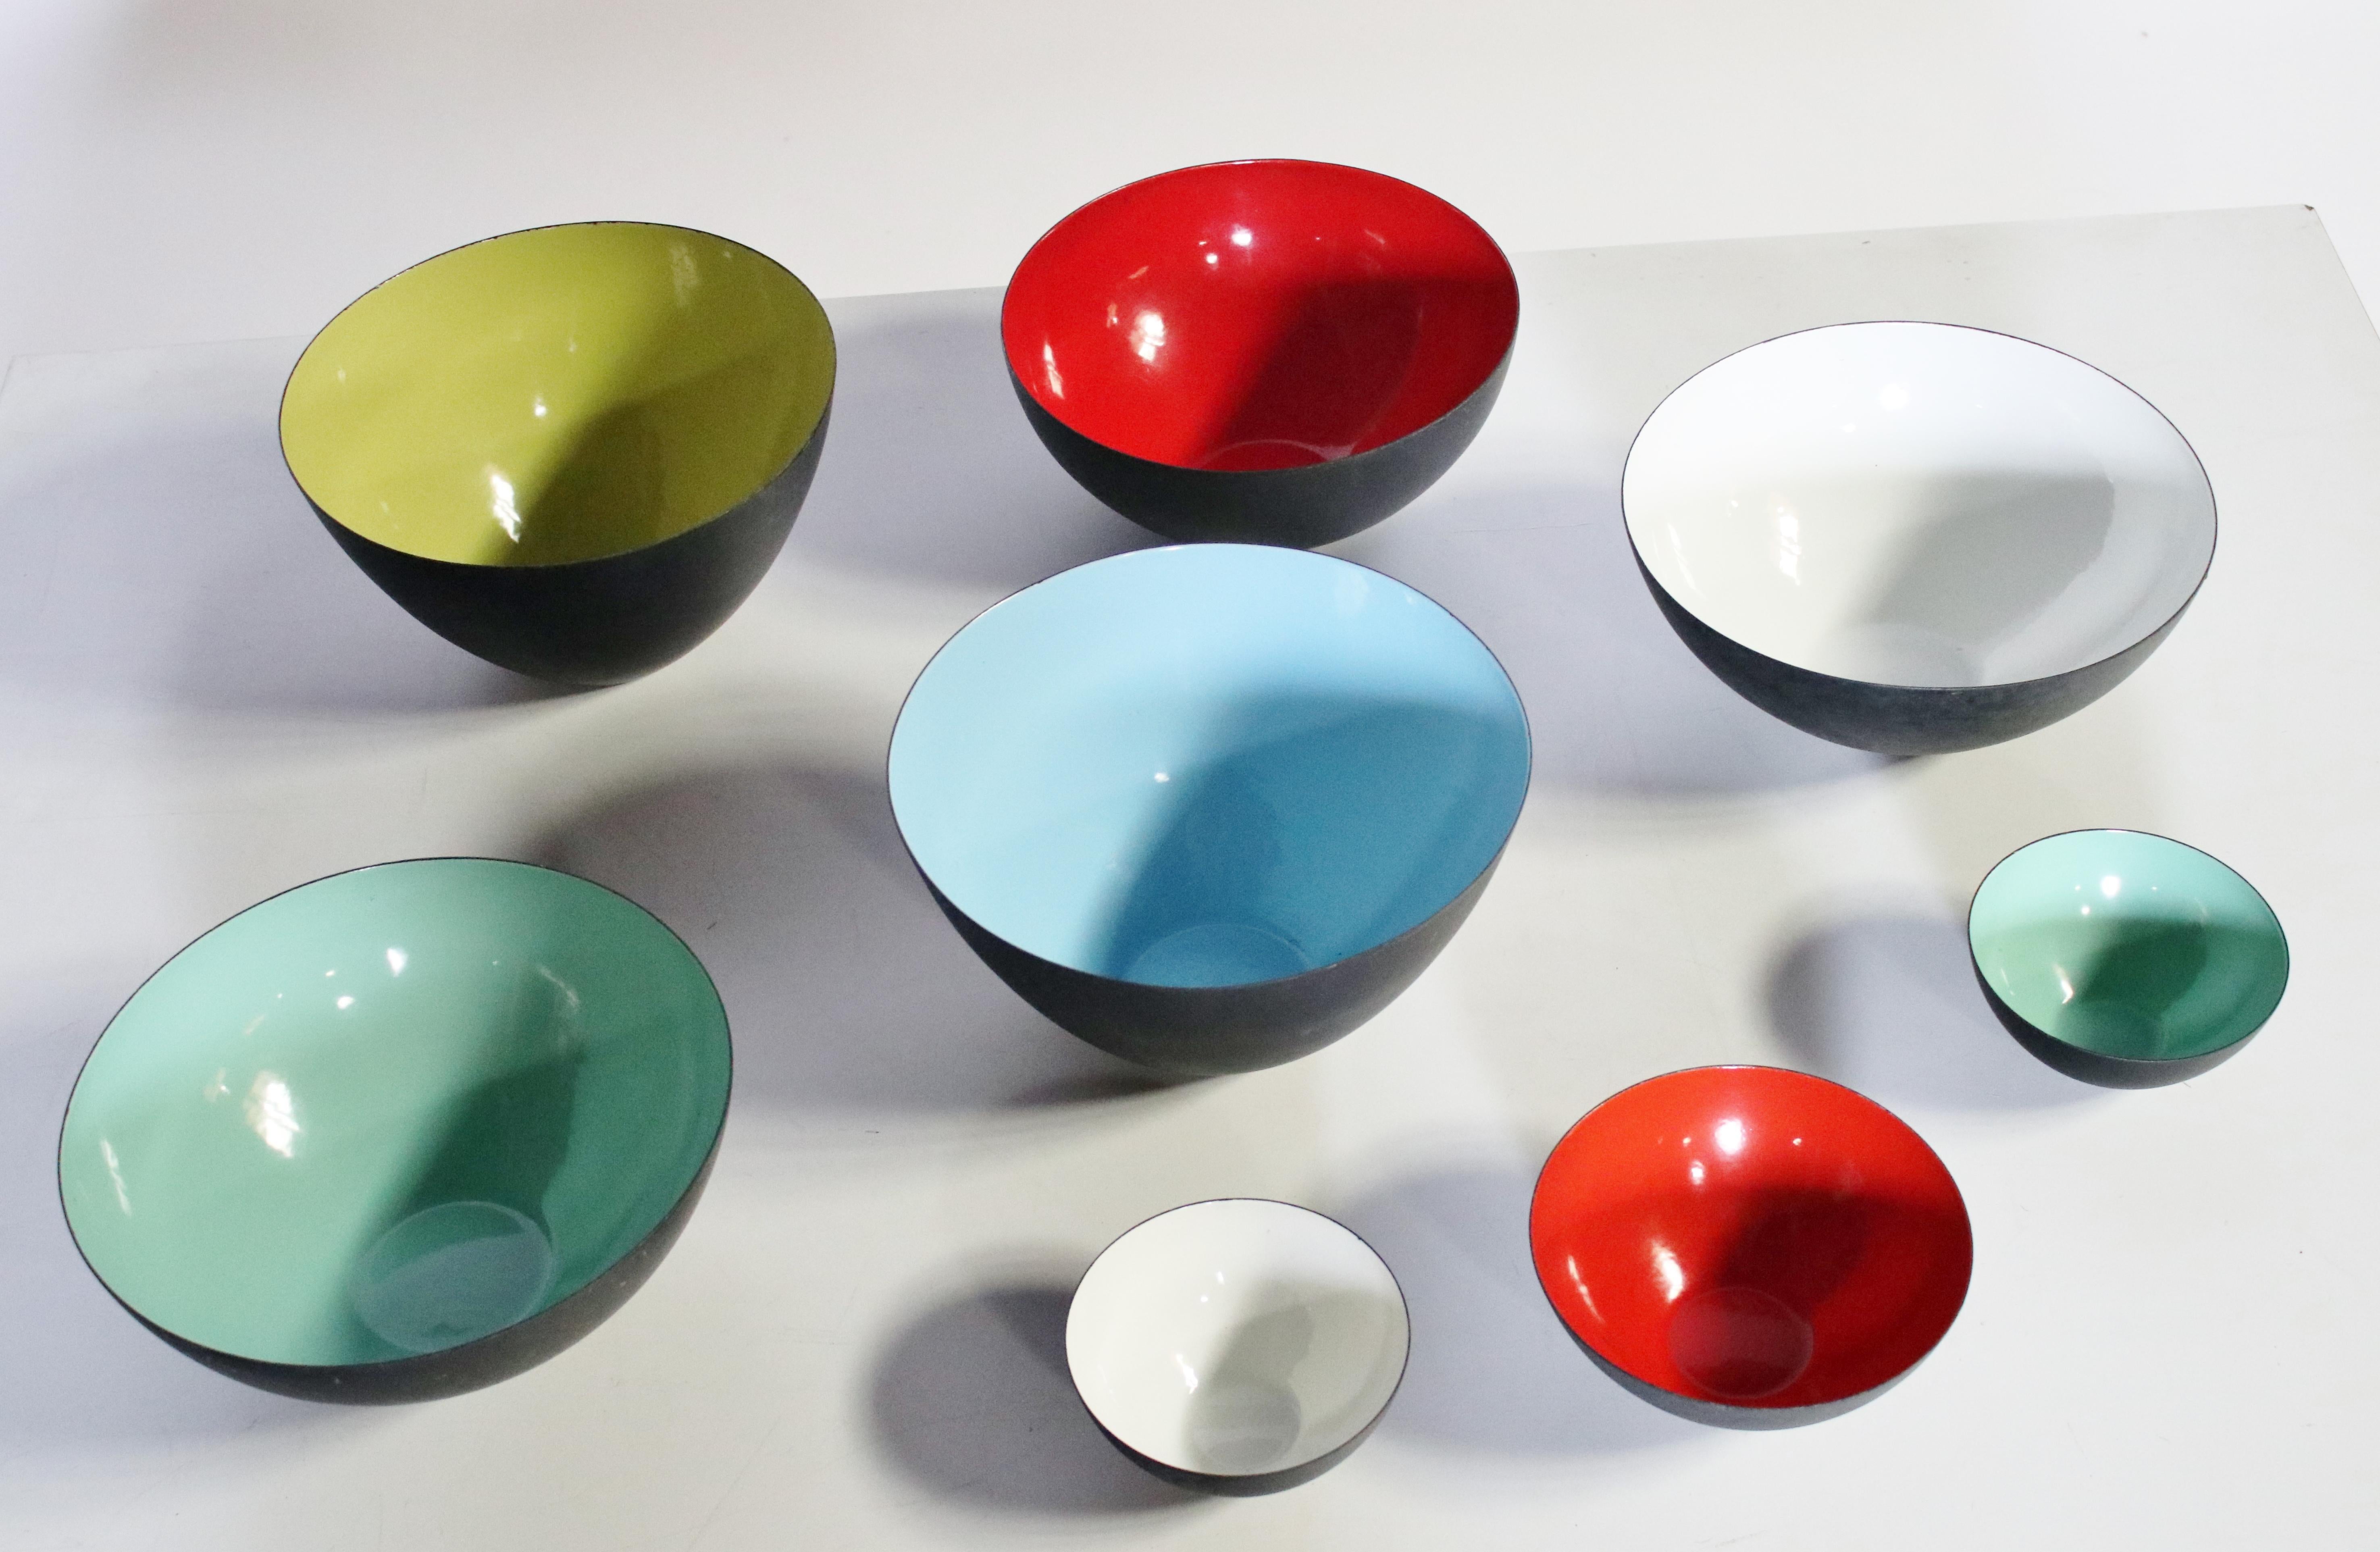 Set of eight Krenit bowls in various sizes and colors.
Includes:
Three- Large bowls 9 7/8